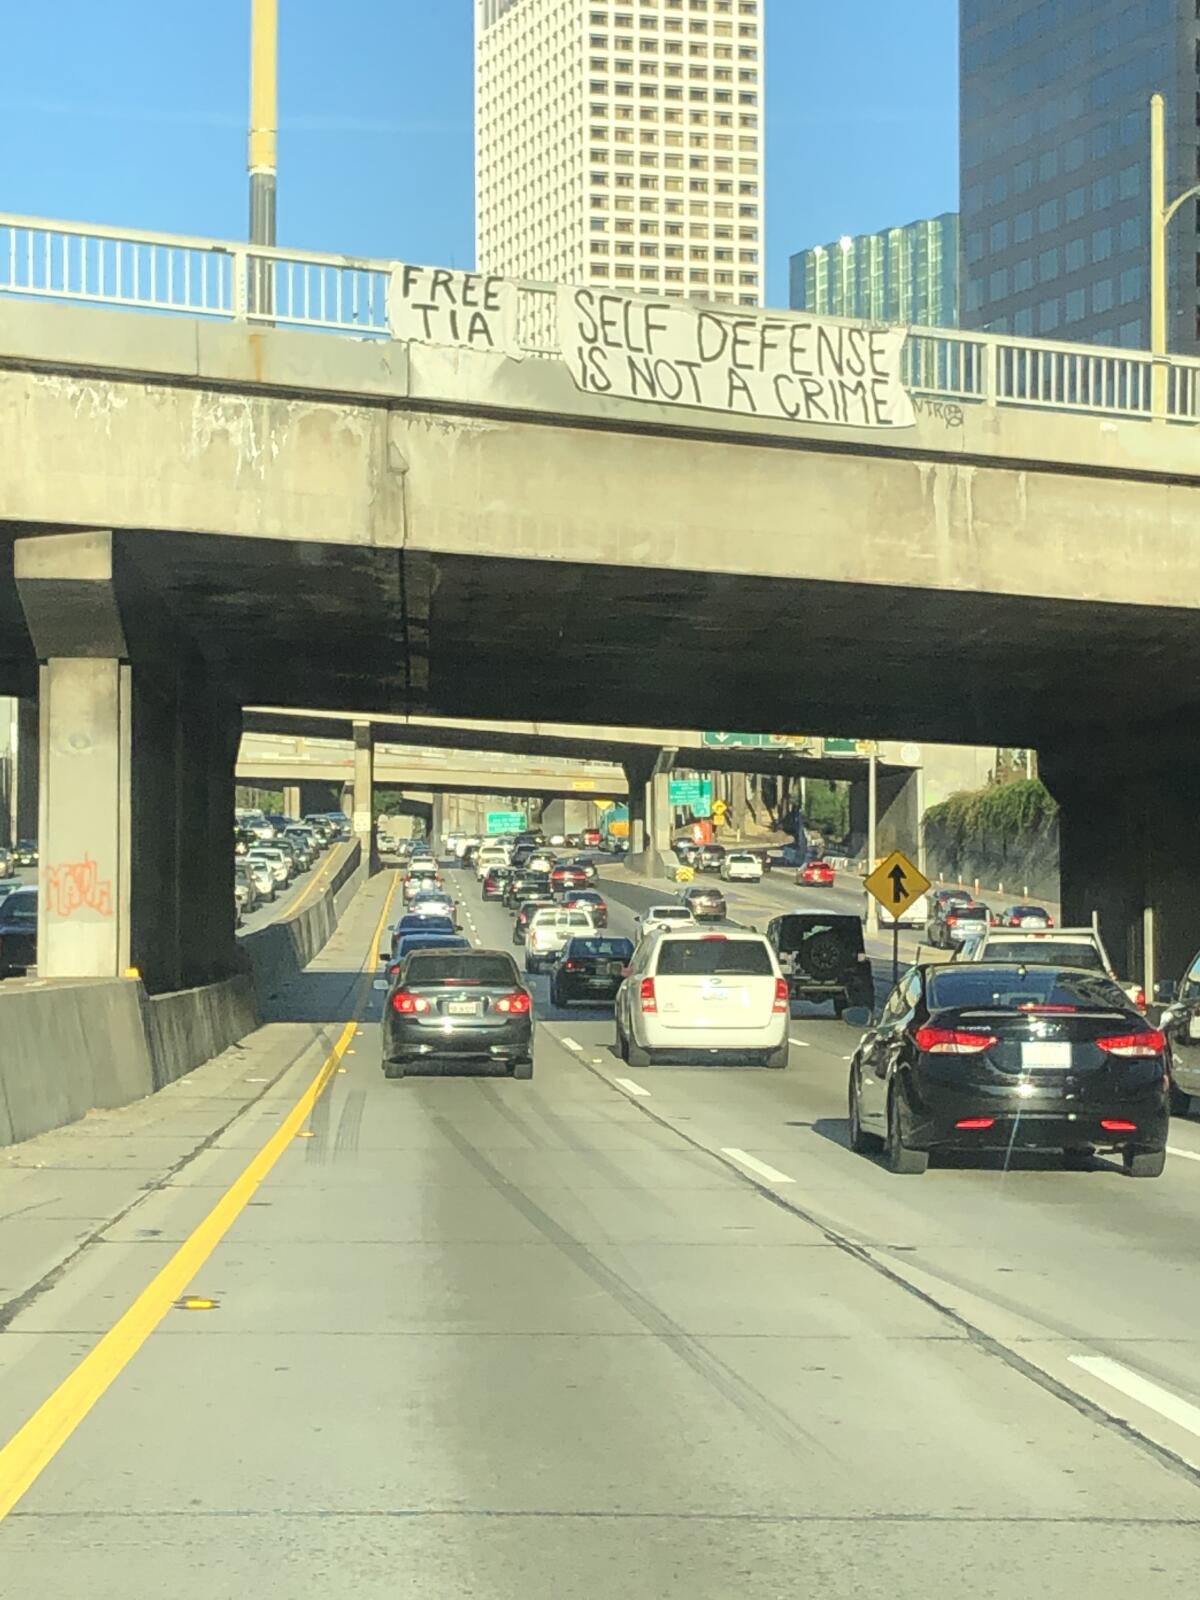 Signs hanging from freeway overpass say "Free Tia" and "Self defense is not a crime"